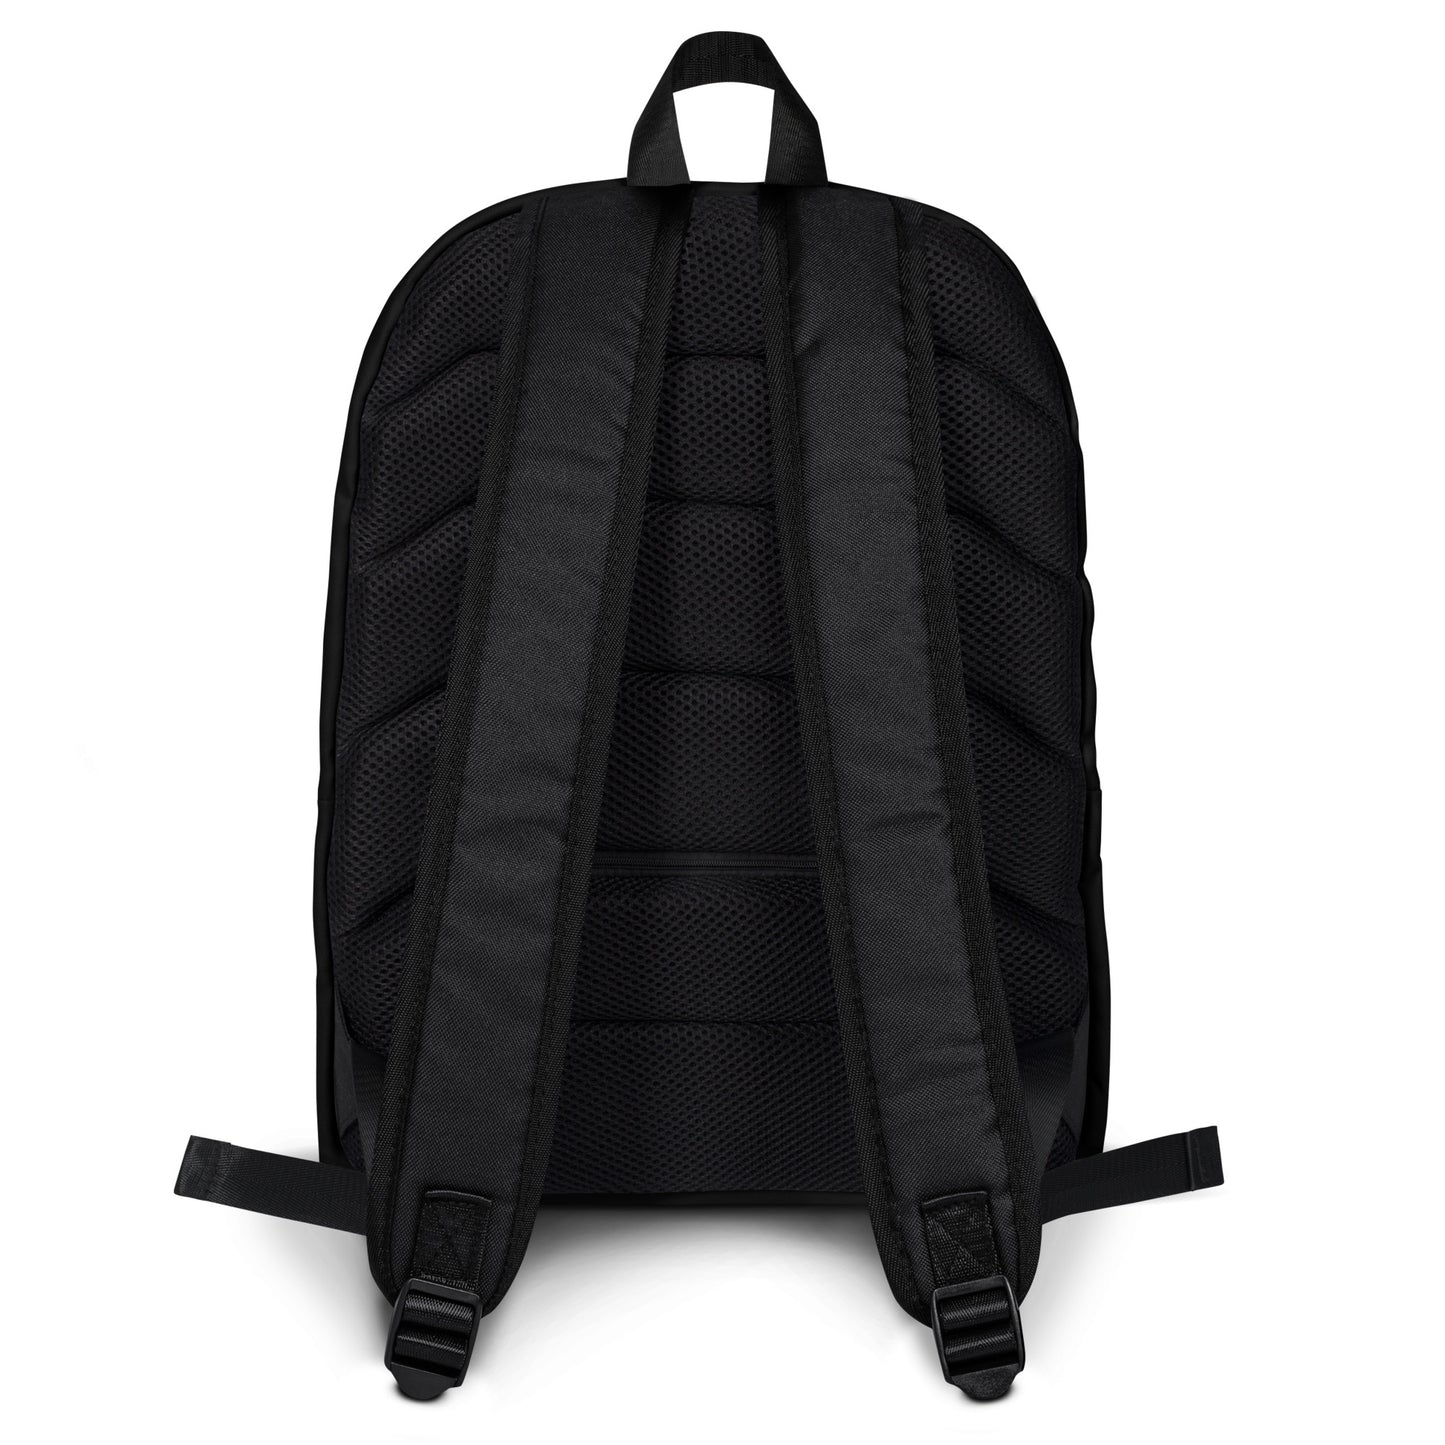 Delta Sigma Theta "The Assignment" Minimalist Backpack